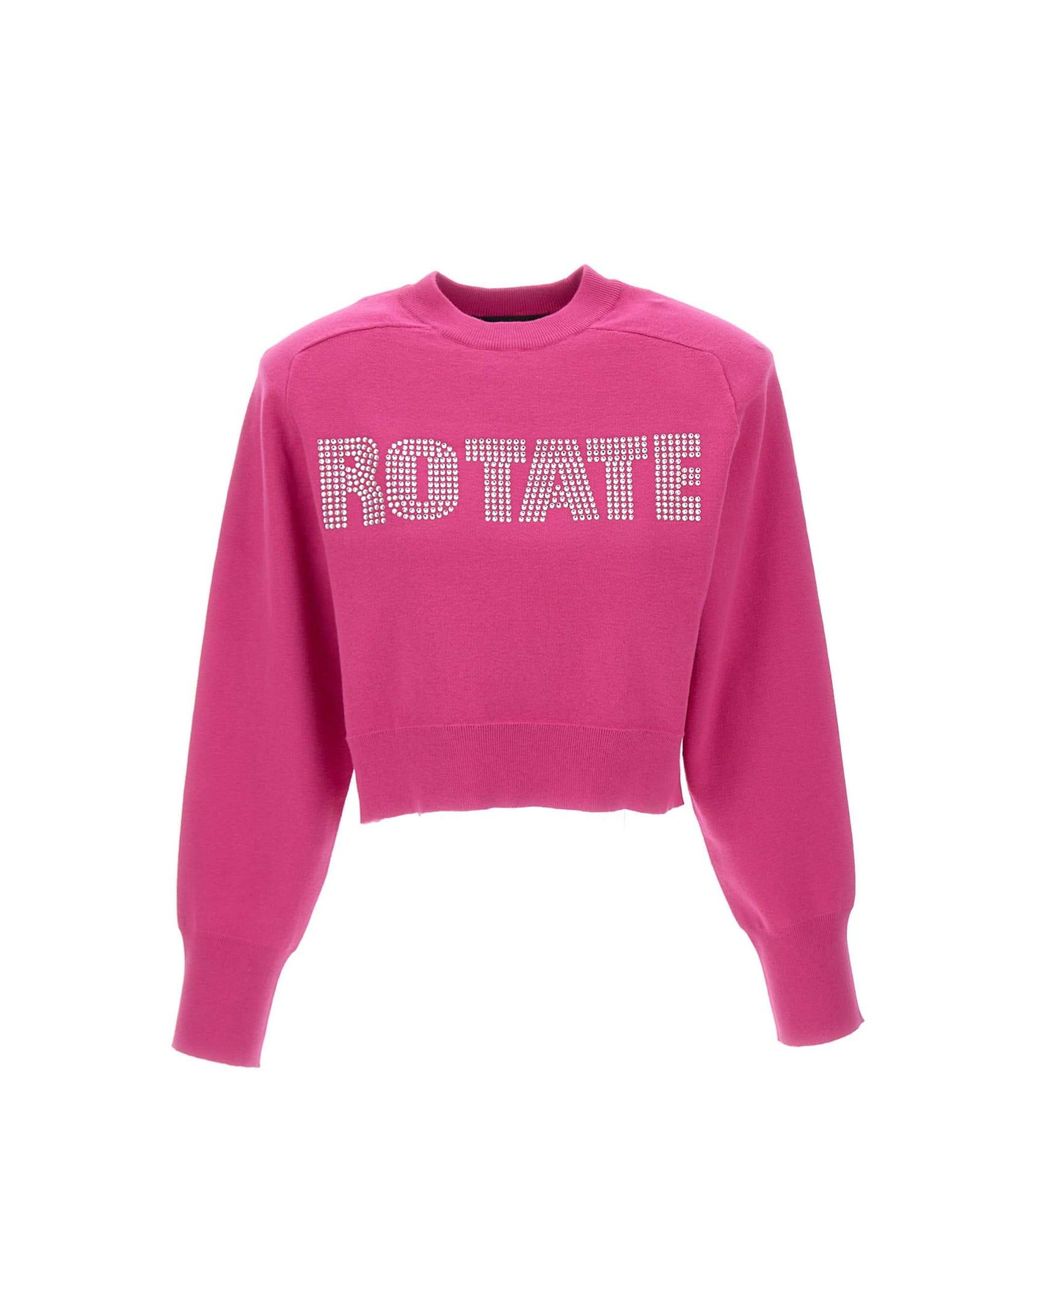 ROTATE BIRGER CHRISTENSEN Cotton And Cashmere Sweater in Pink | Lyst